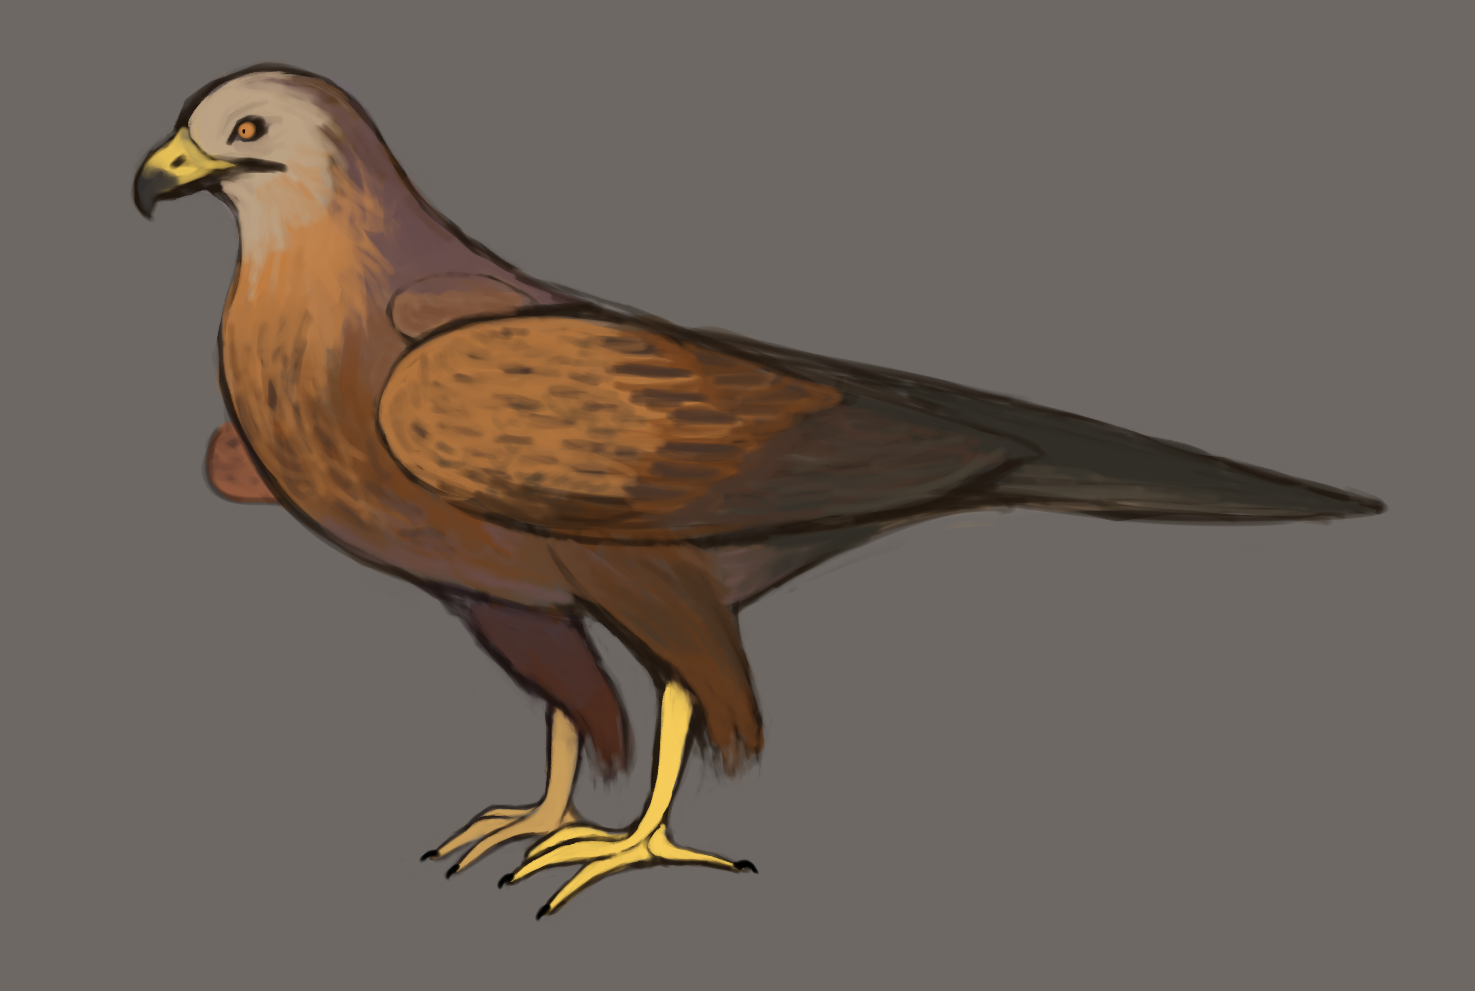 a semi-realistic drawing of a red kite facing left, against a neutral gray background.